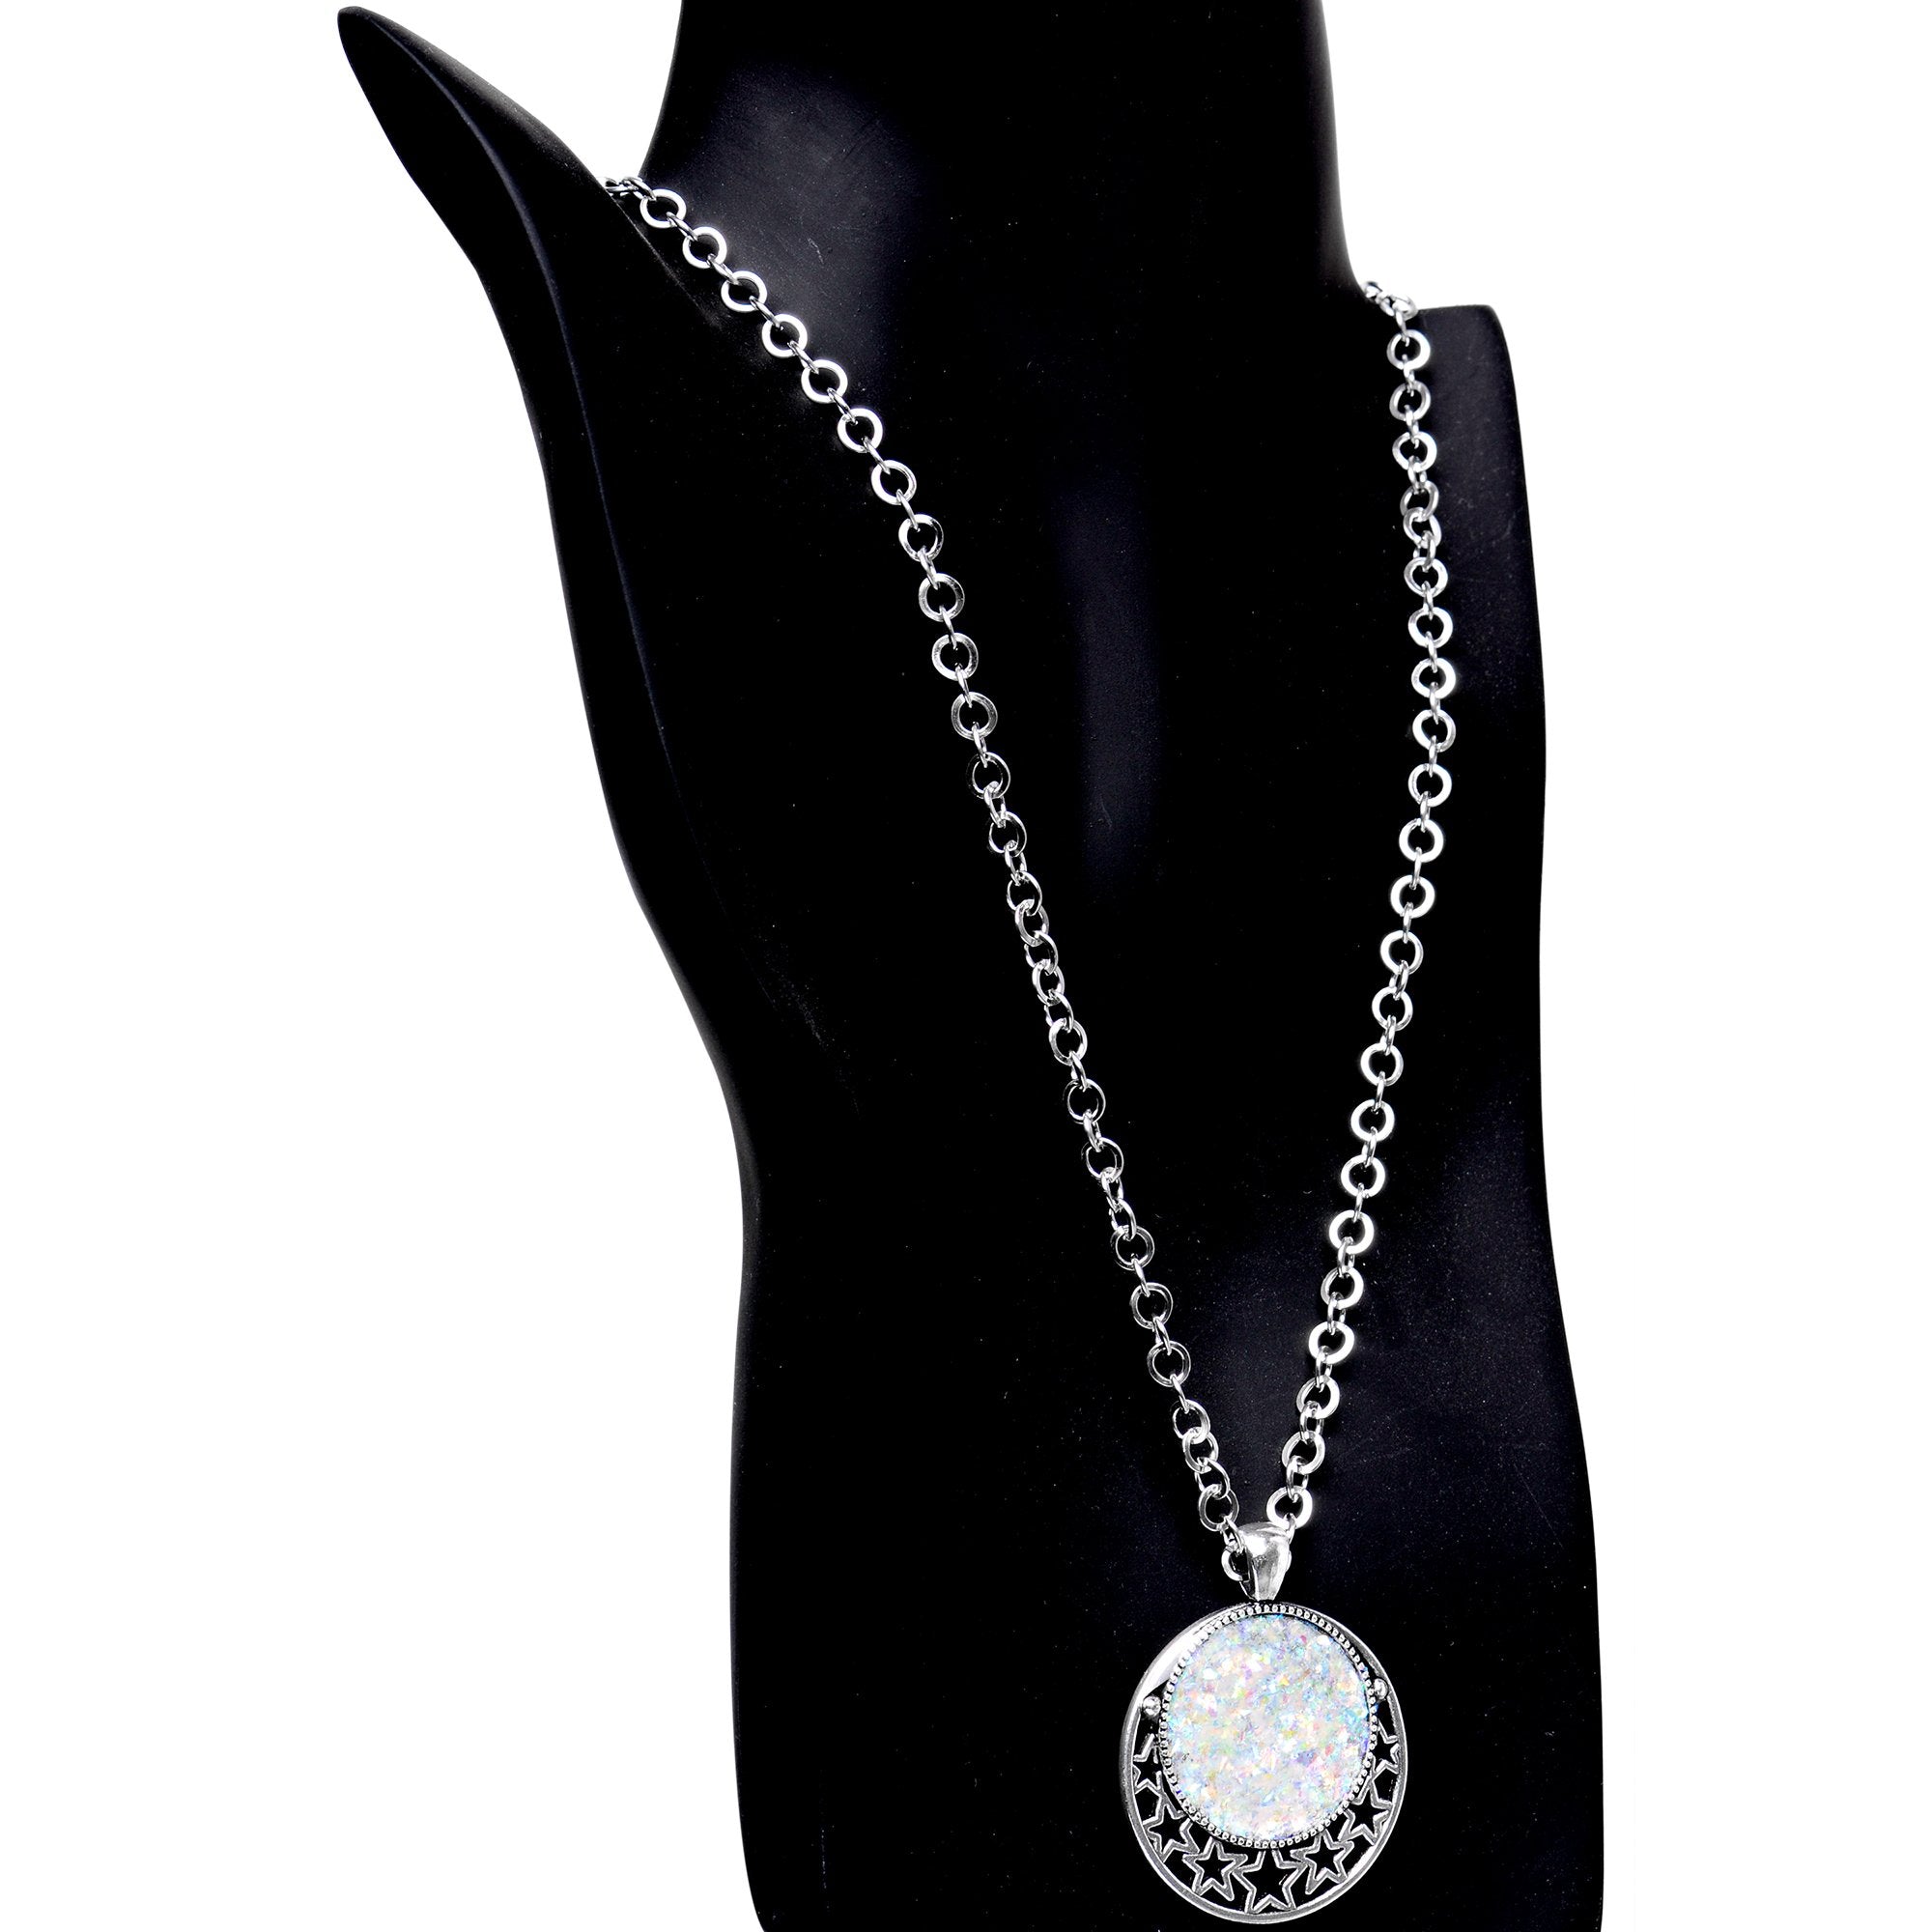 Handmade White Faux Opal Starry Universe Silver Plated Chain Necklace